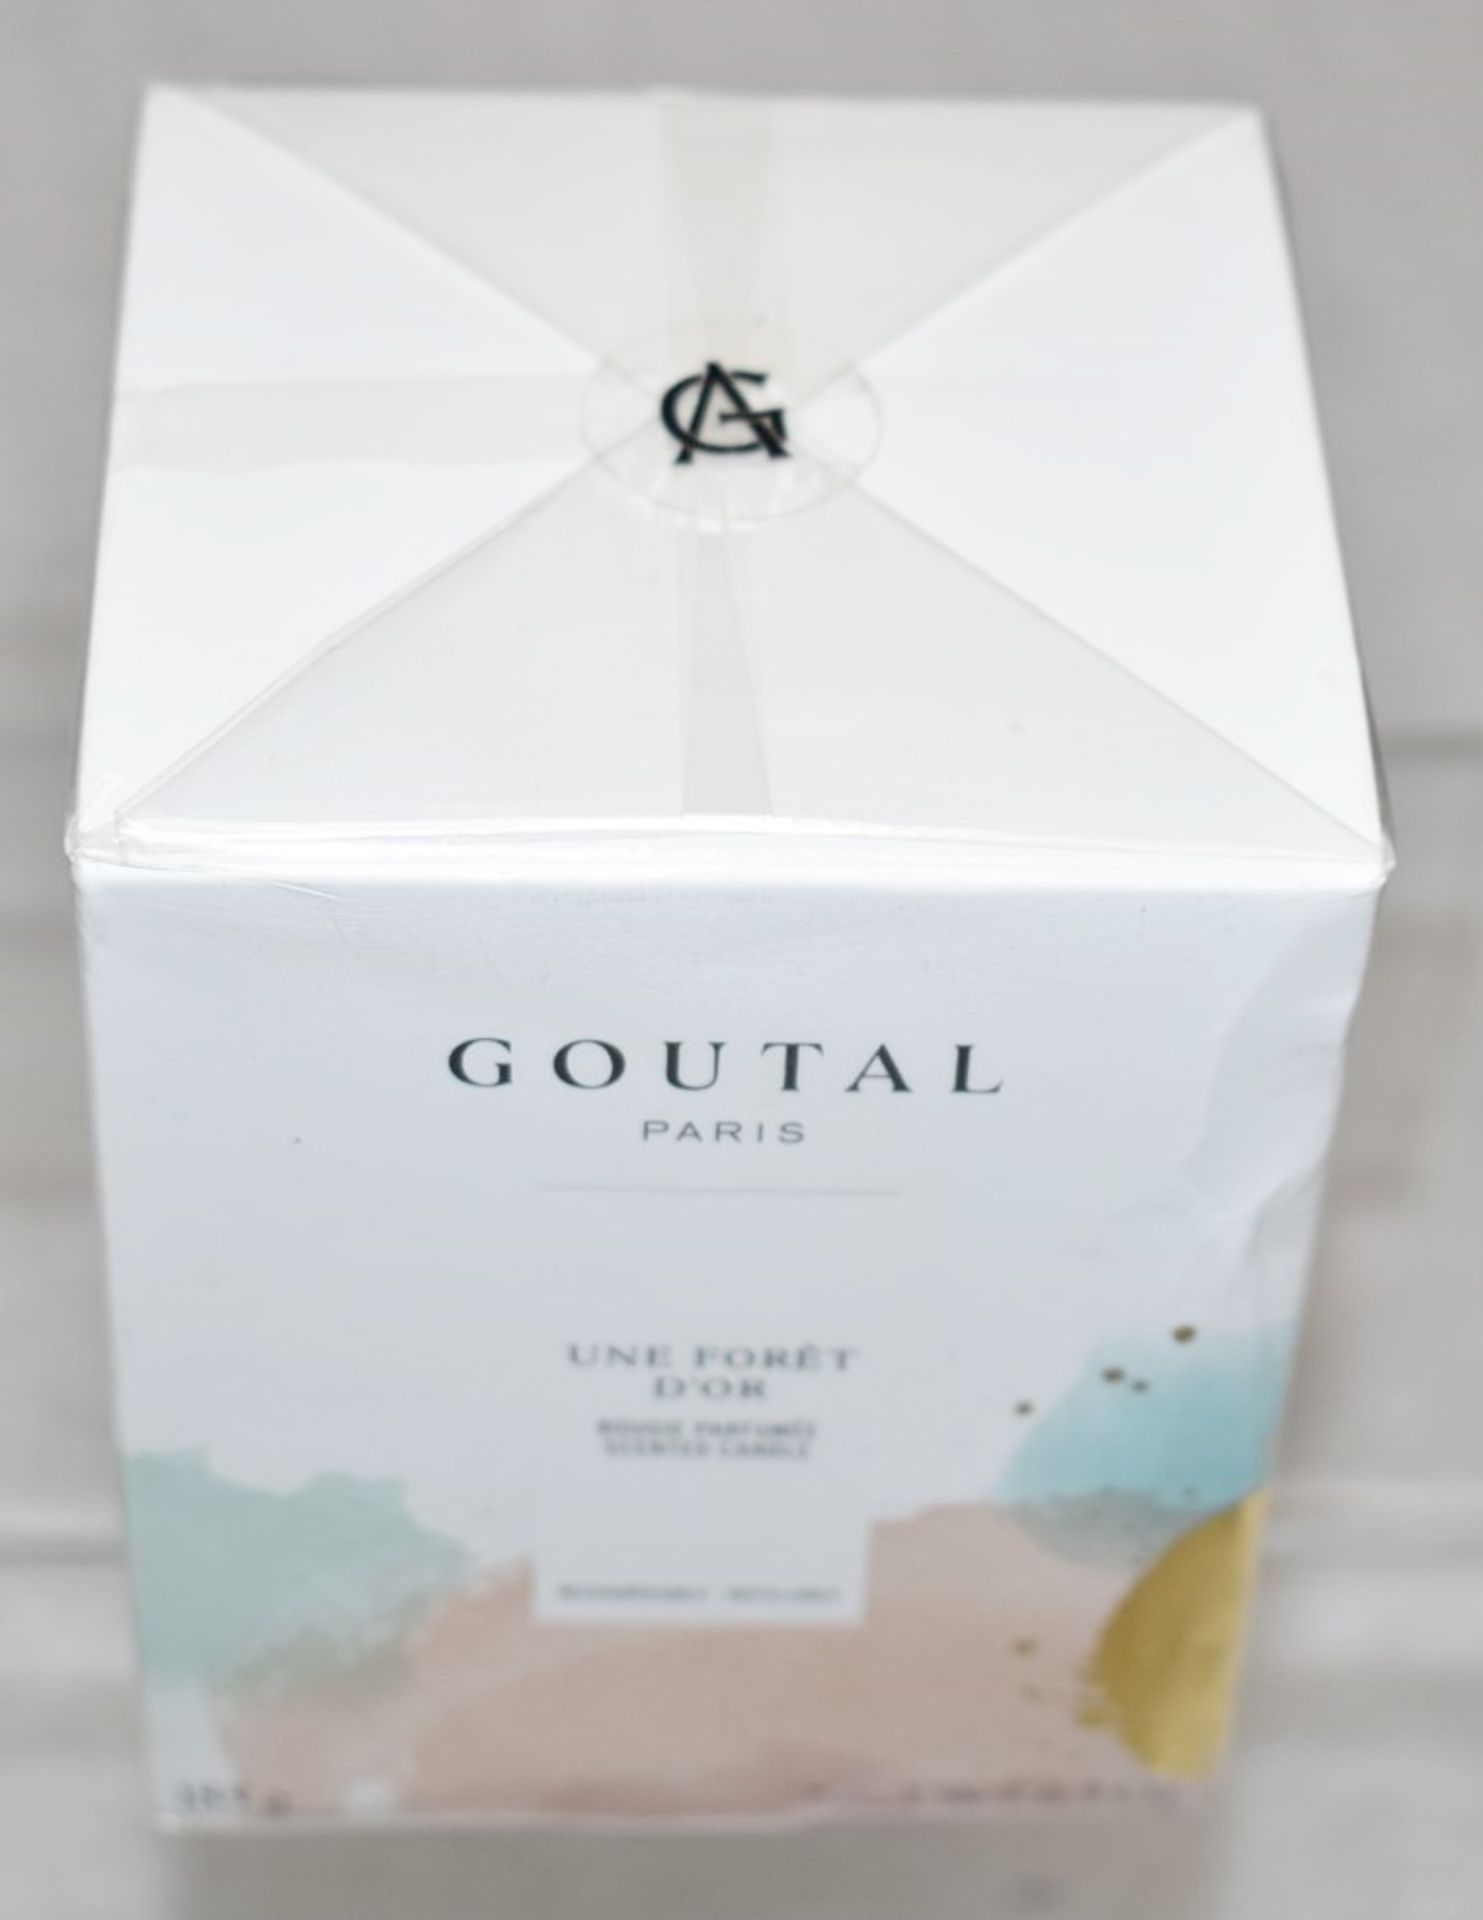 1 x GOUTAL PARIS Une Forêt d'Or Luxury Scented Candle (185g) - Sealed/Boxed - Original Price £57.00 - Image 2 of 4